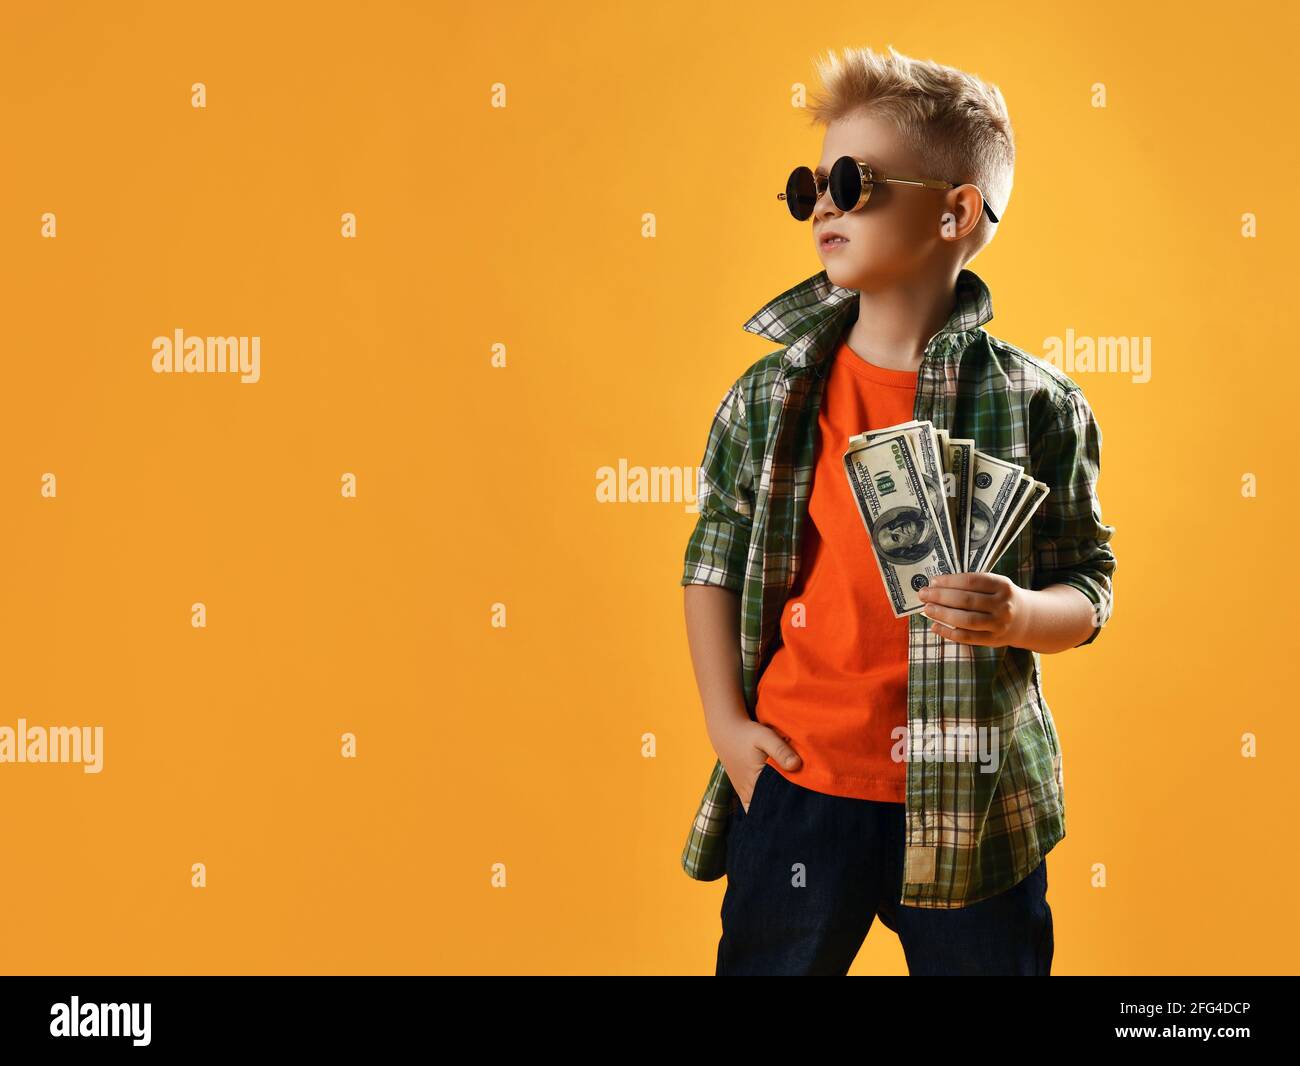 Insolent daring rich teenager boy in round sunglasses, checkered plaid shirt and jeans stands holding bundle of cash Stock Photo